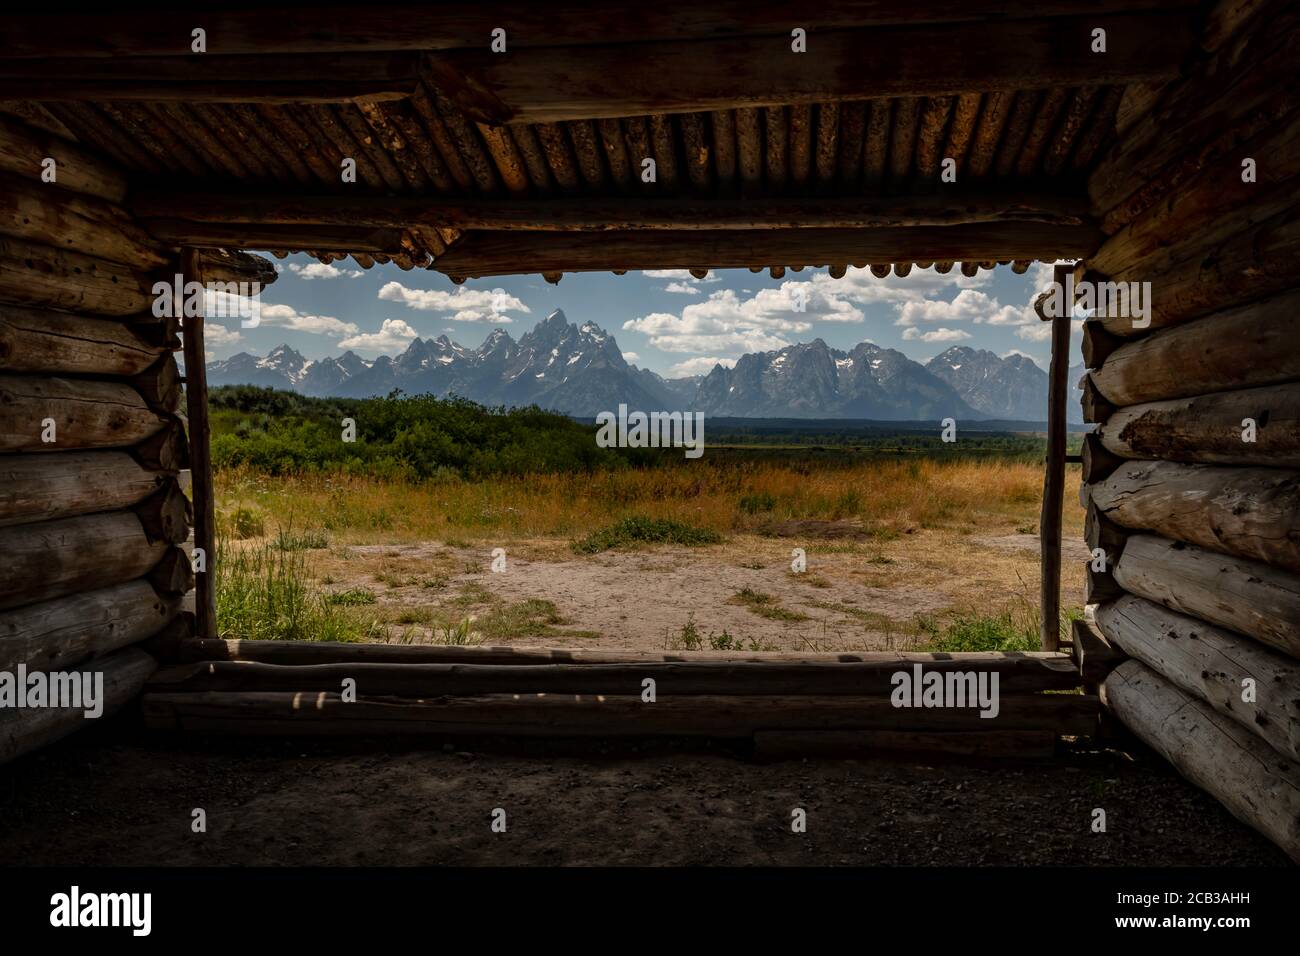 The Grand Teton mountain range near Jackson Hole, Wyoming as seen from the historic homestead site of Cunningham Cabin. Stock Photo